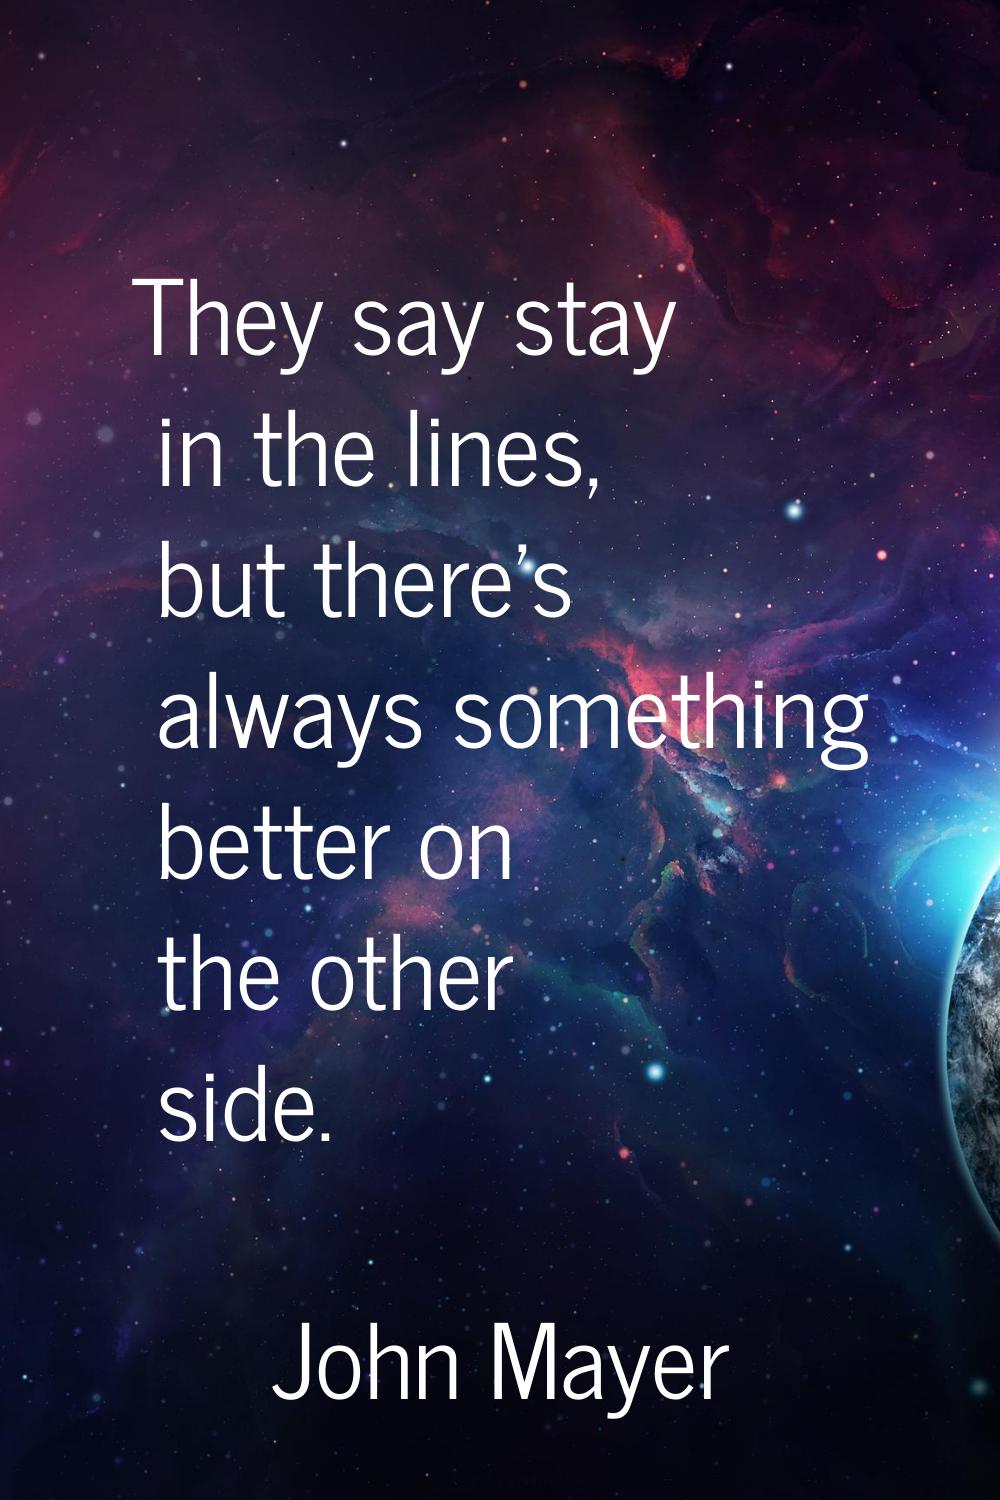 They say stay in the lines, but there's always something better on the other side.